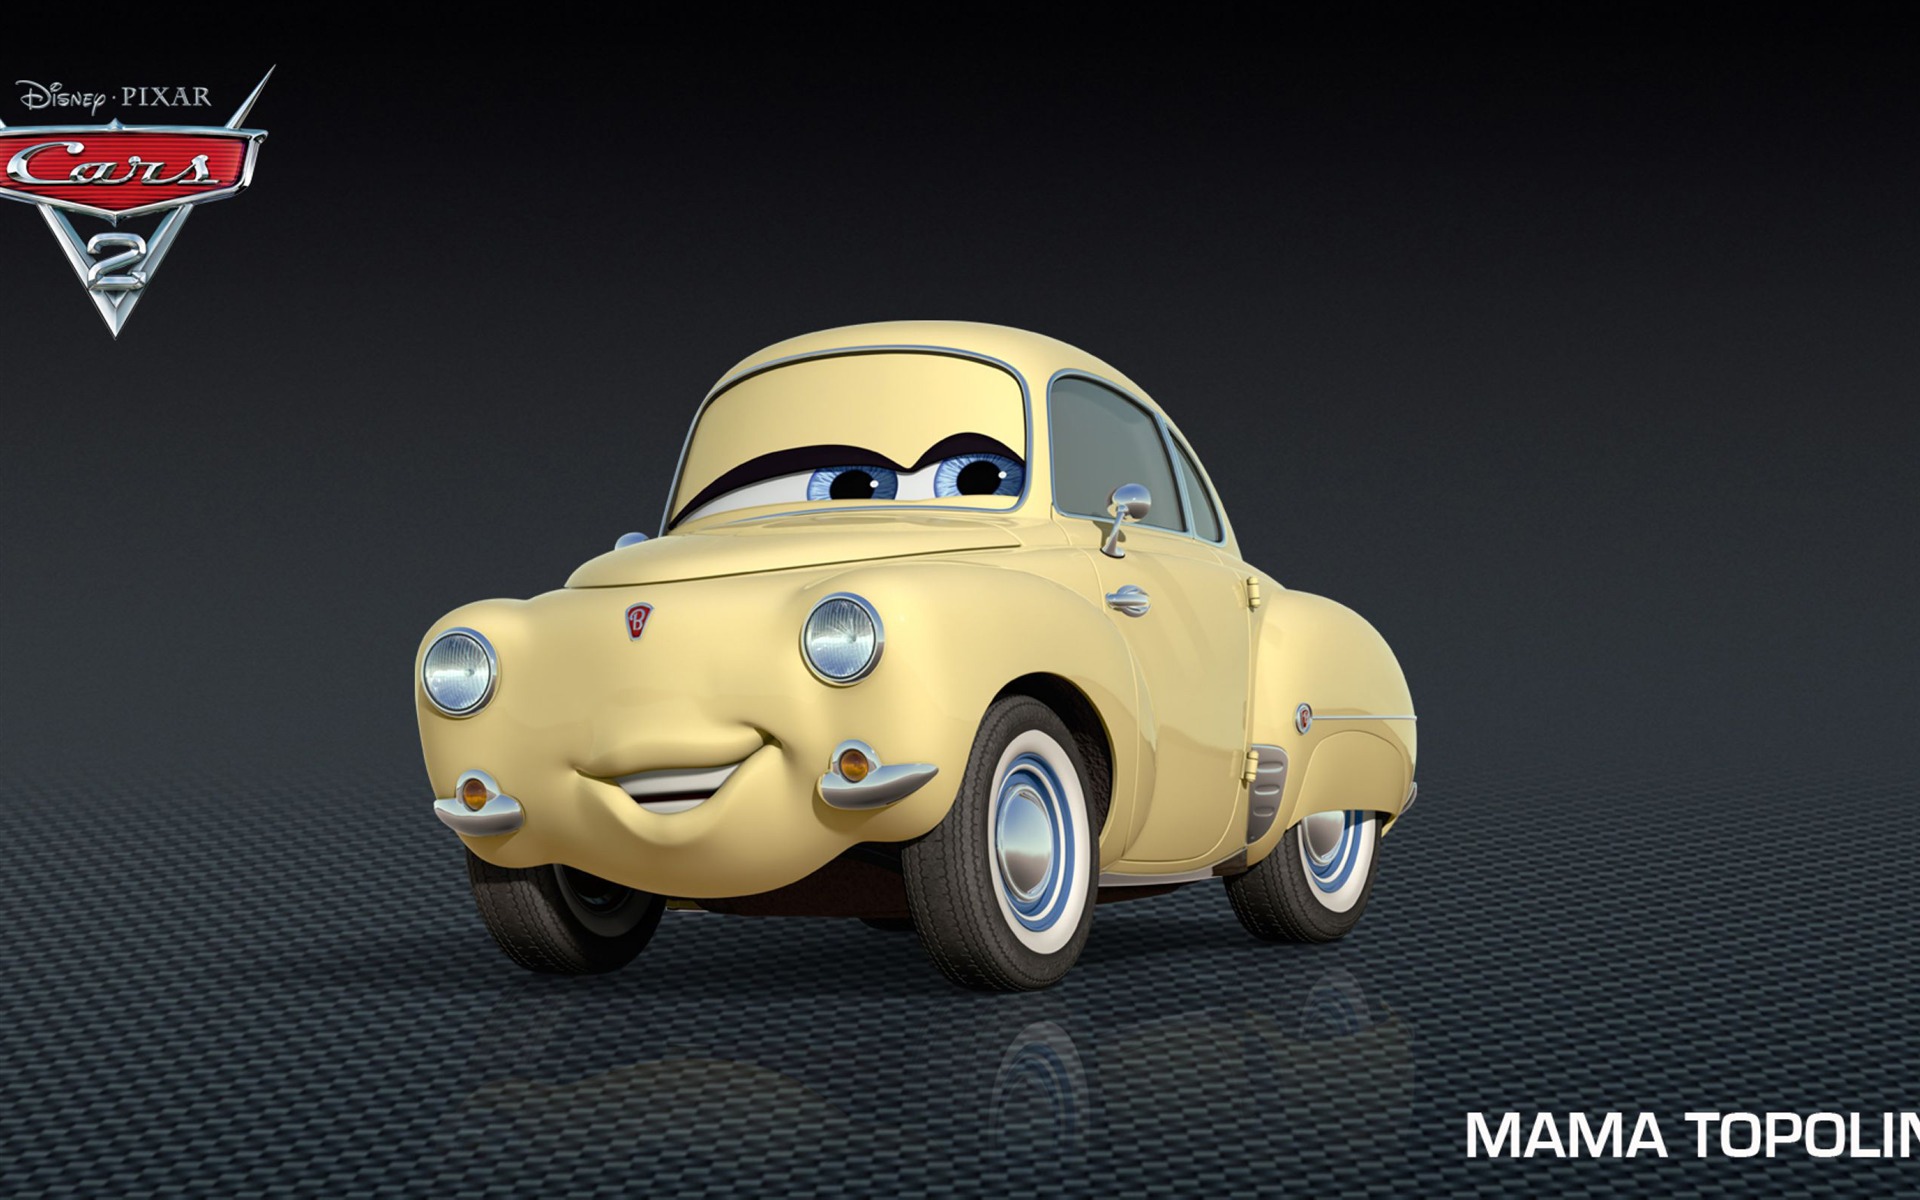 Cars 2 wallpapers #27 - 1920x1200